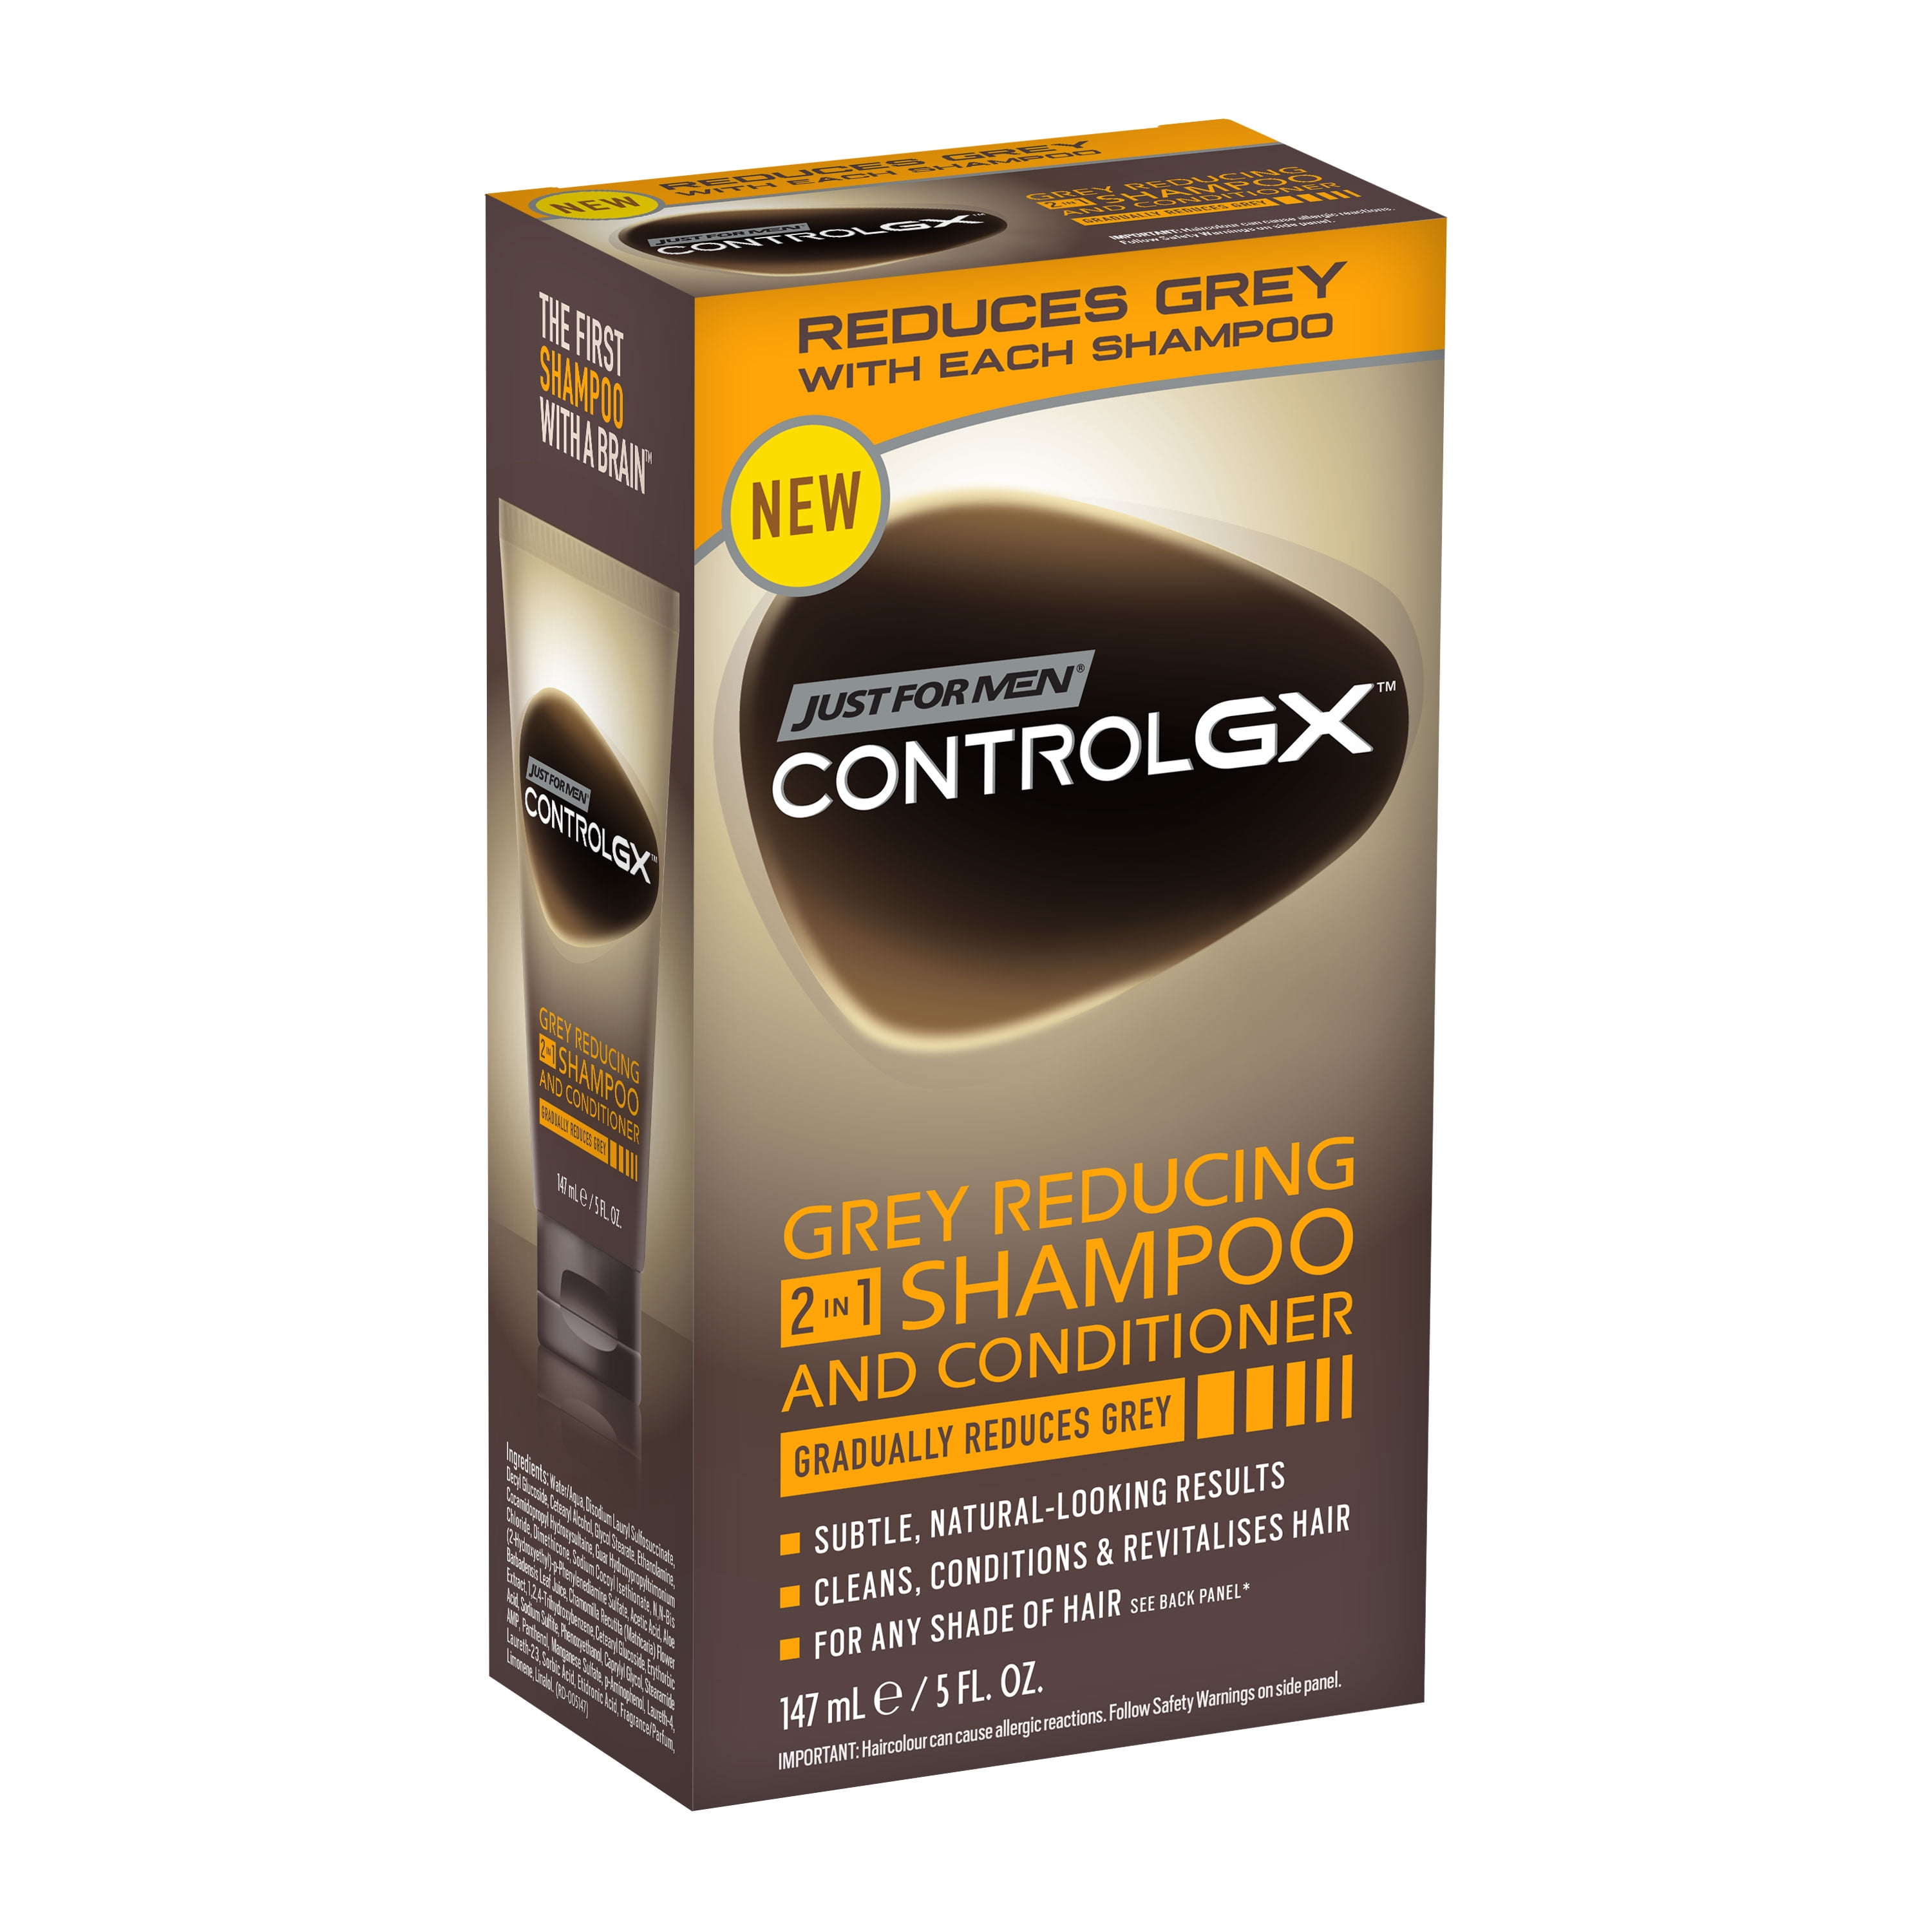  Just For Men Control GX Grey Reducing Shampoo, Gradual Hair  Color for Stronger and Healthier Hair, 4 Fl Oz - Pack of 1 (Packaging May  Vary) : Beauty & Personal Care